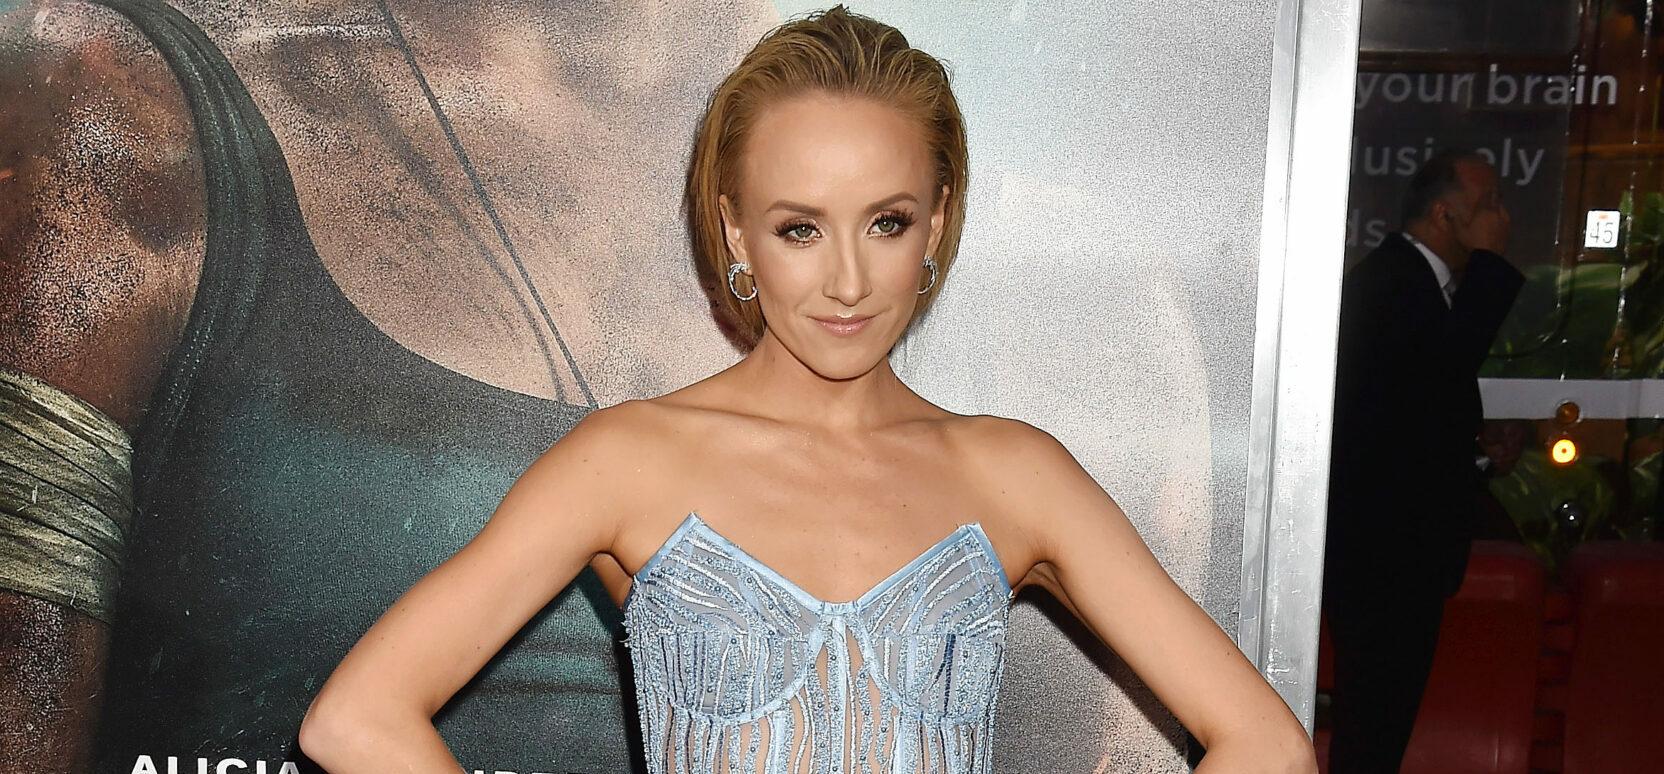 Gymnast Nastia Liukin Gets Skinny-Shamed For Using A Safety Pin To Secure Her Pants